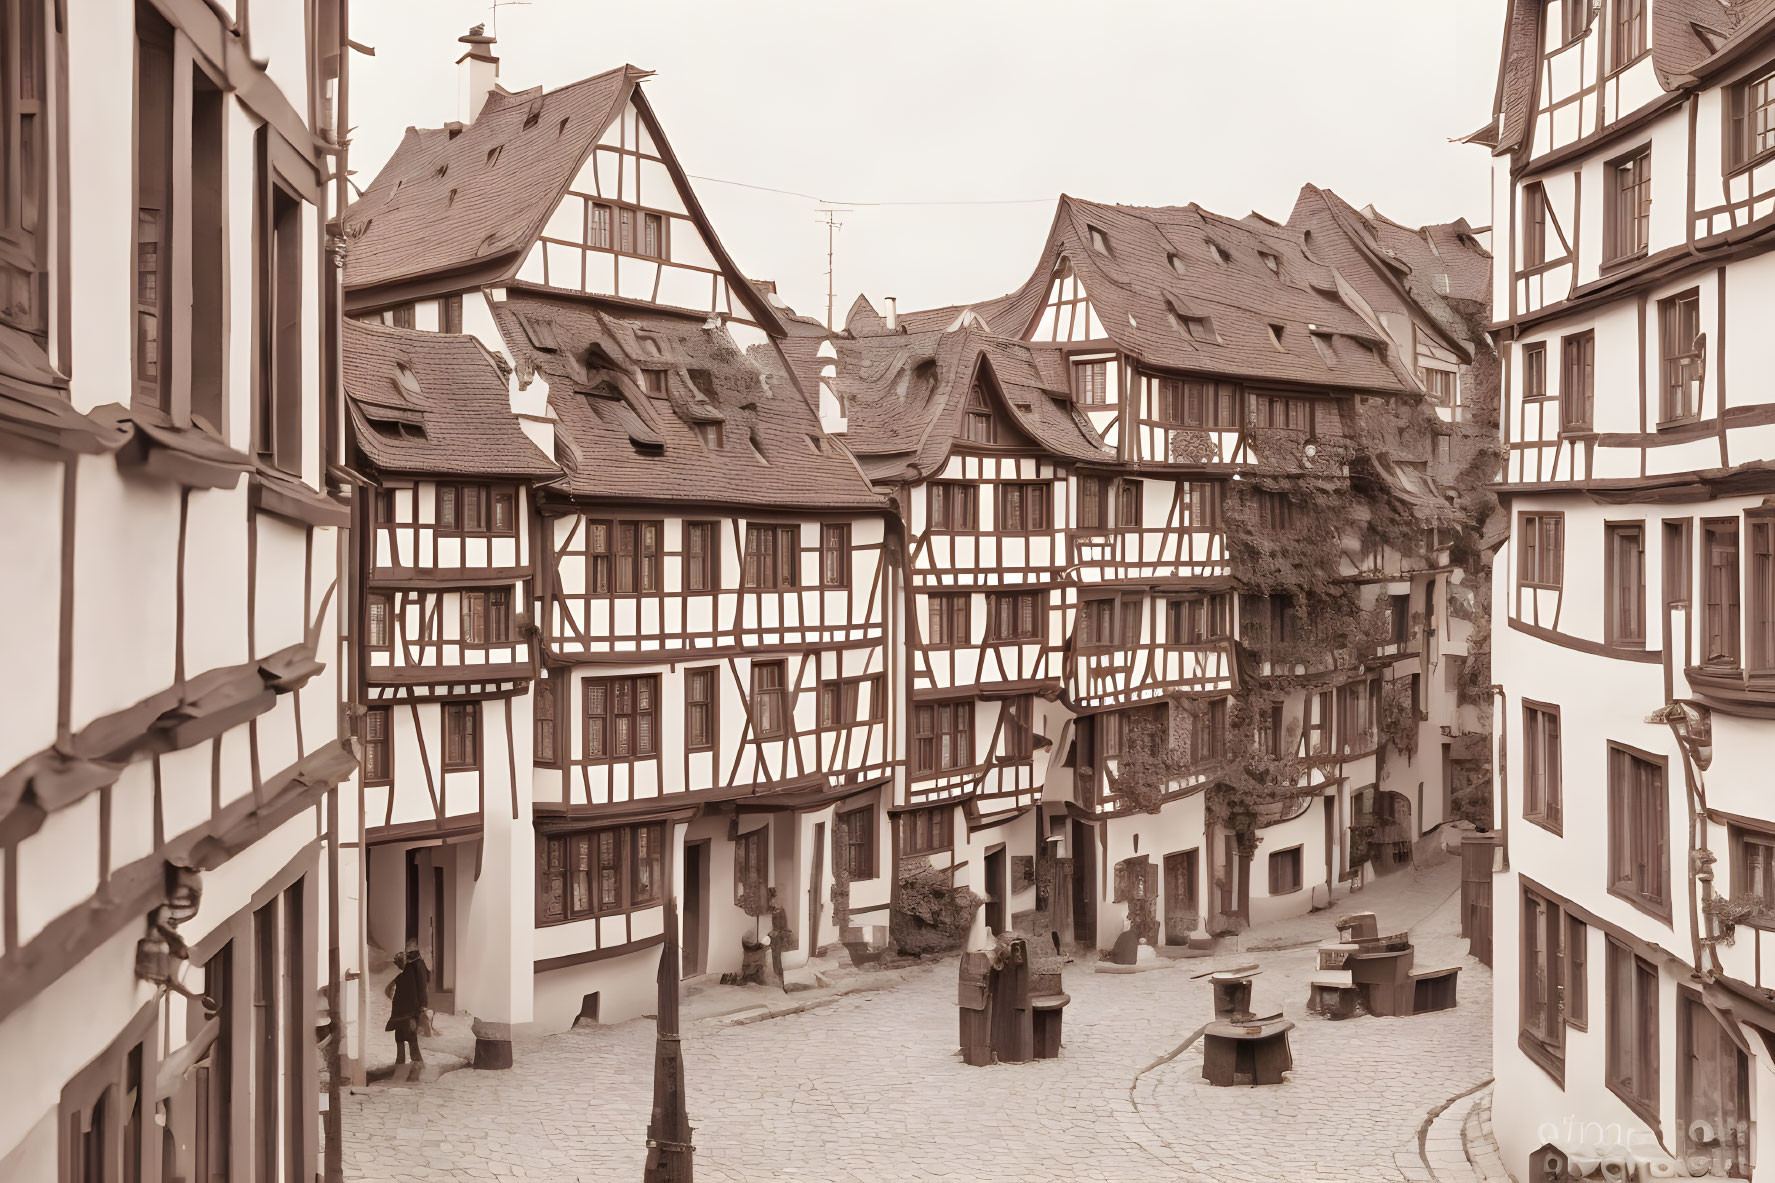 Traditional European alley with half-timbered houses, cobblestone street, and sepia tones